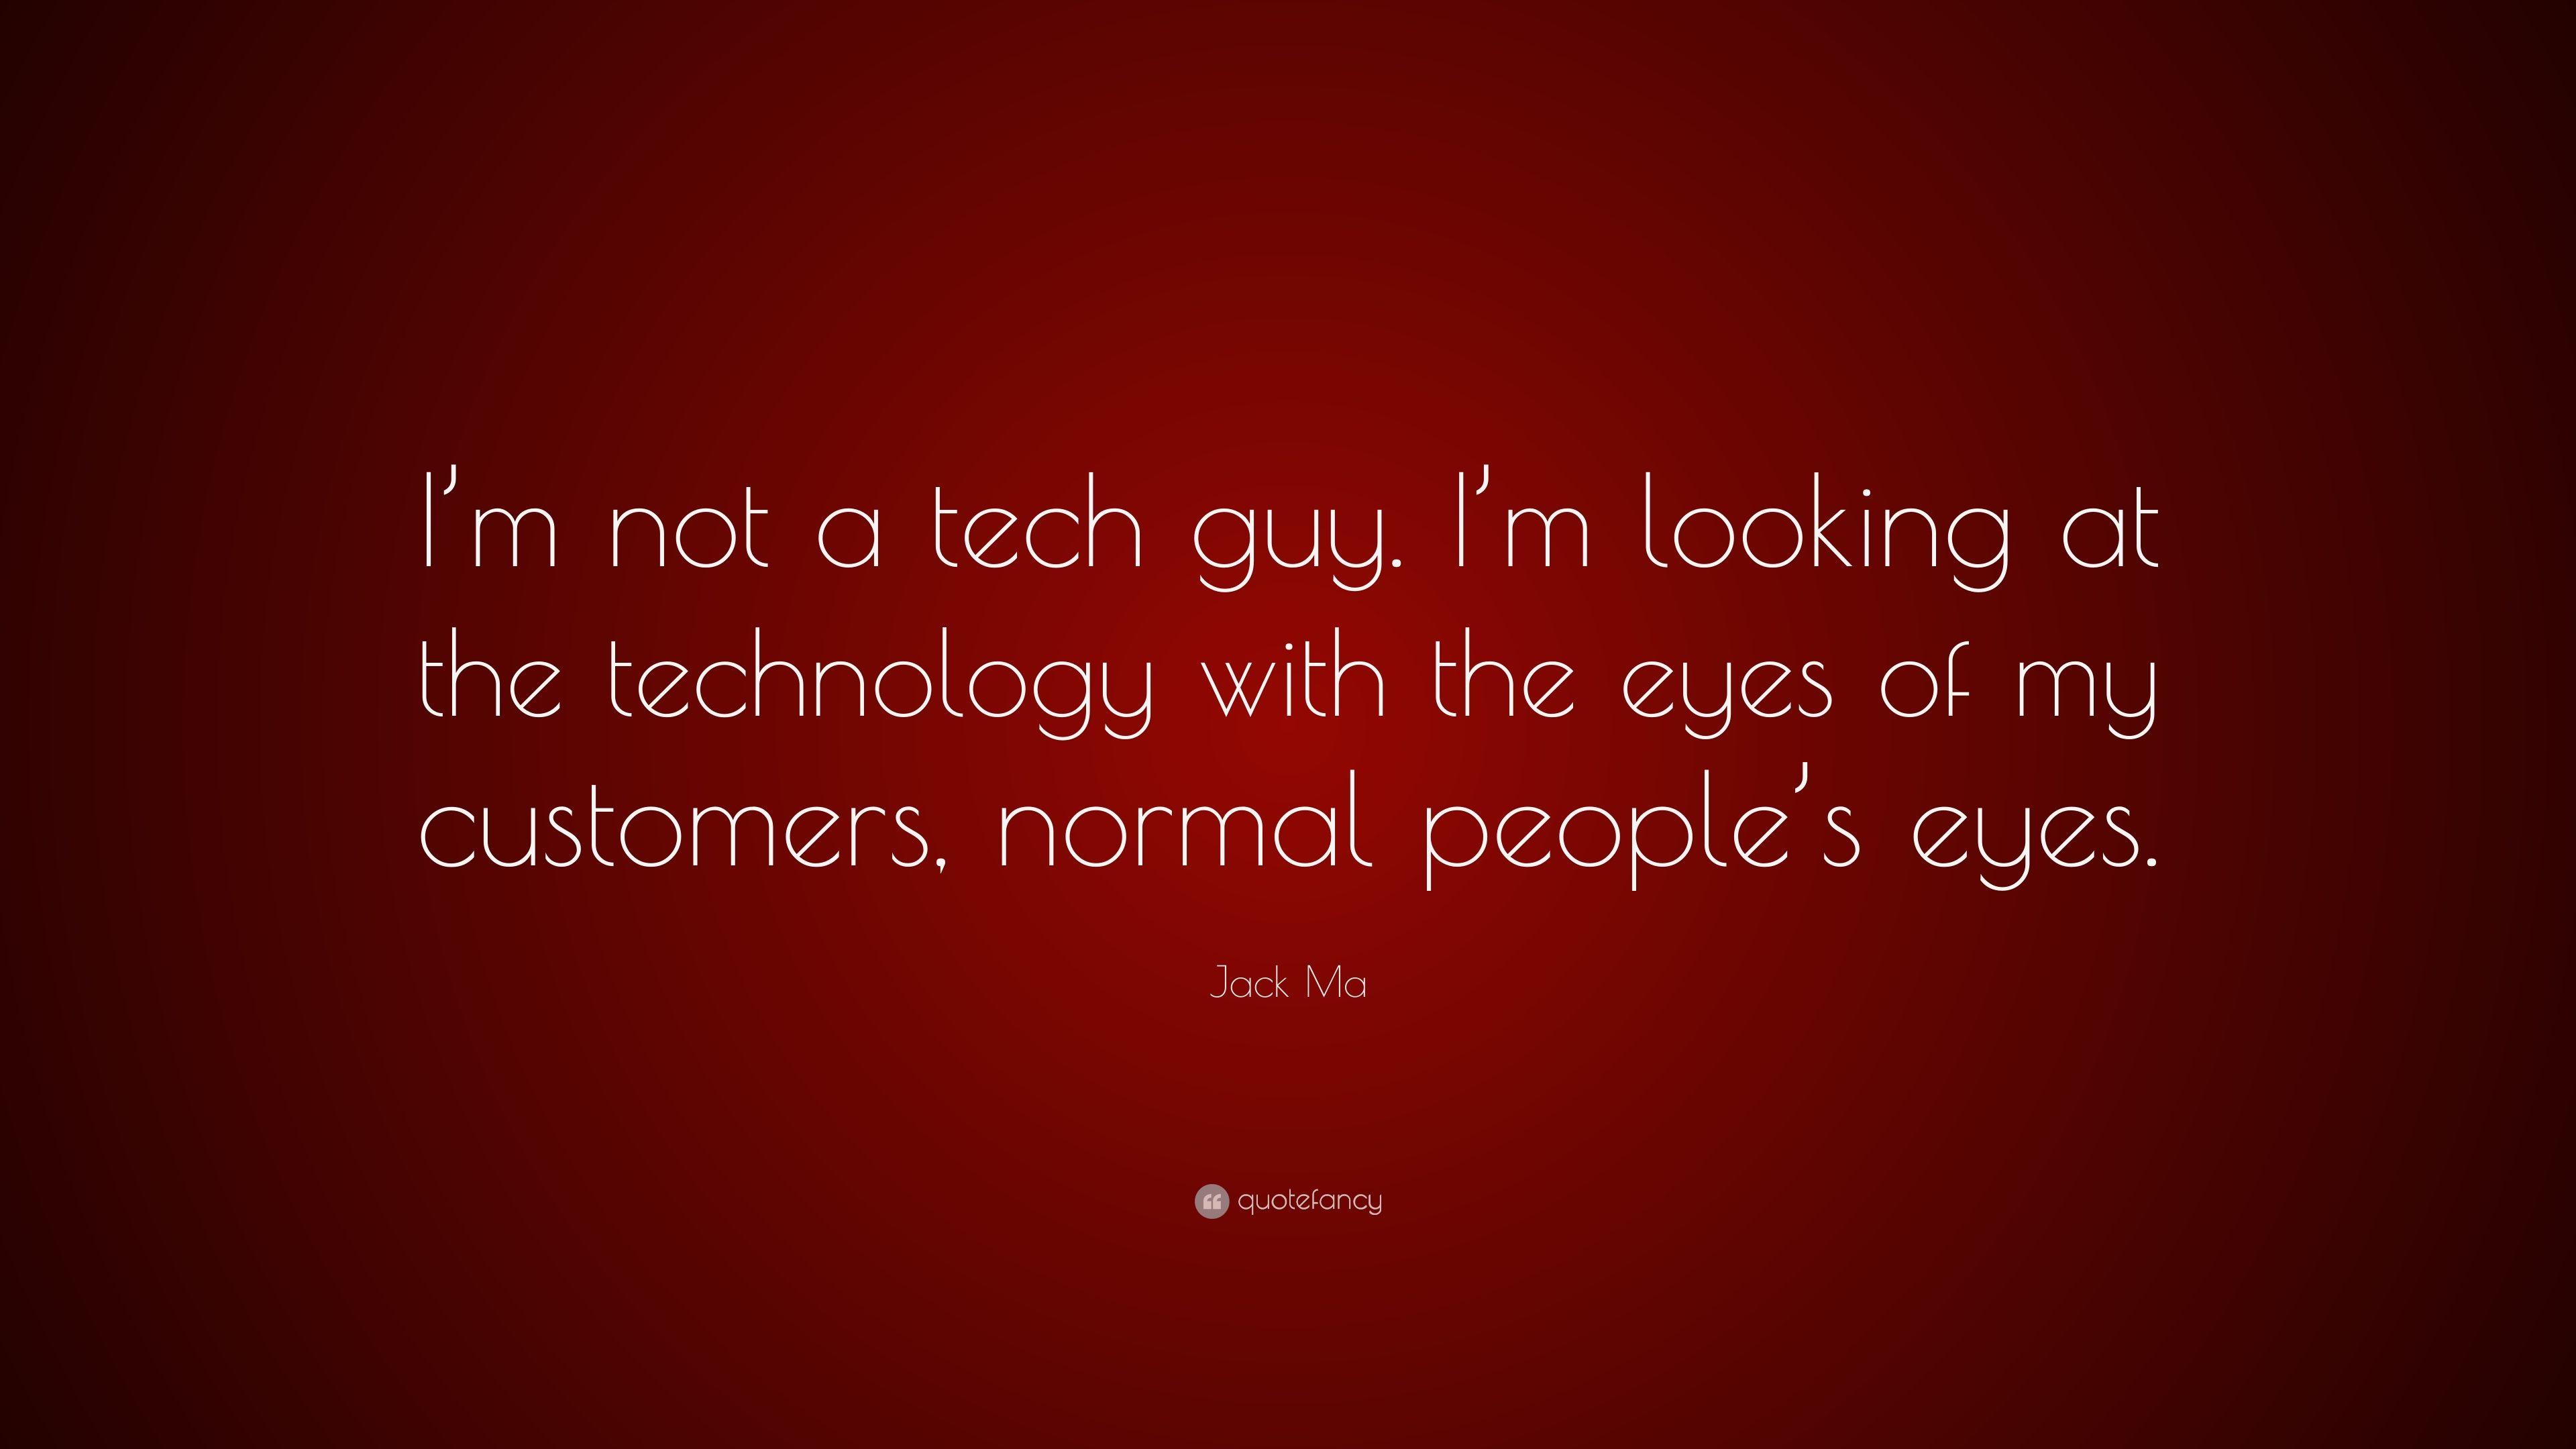 Jack Ma Quote: “I'm not a tech guy. I'm looking at the technology